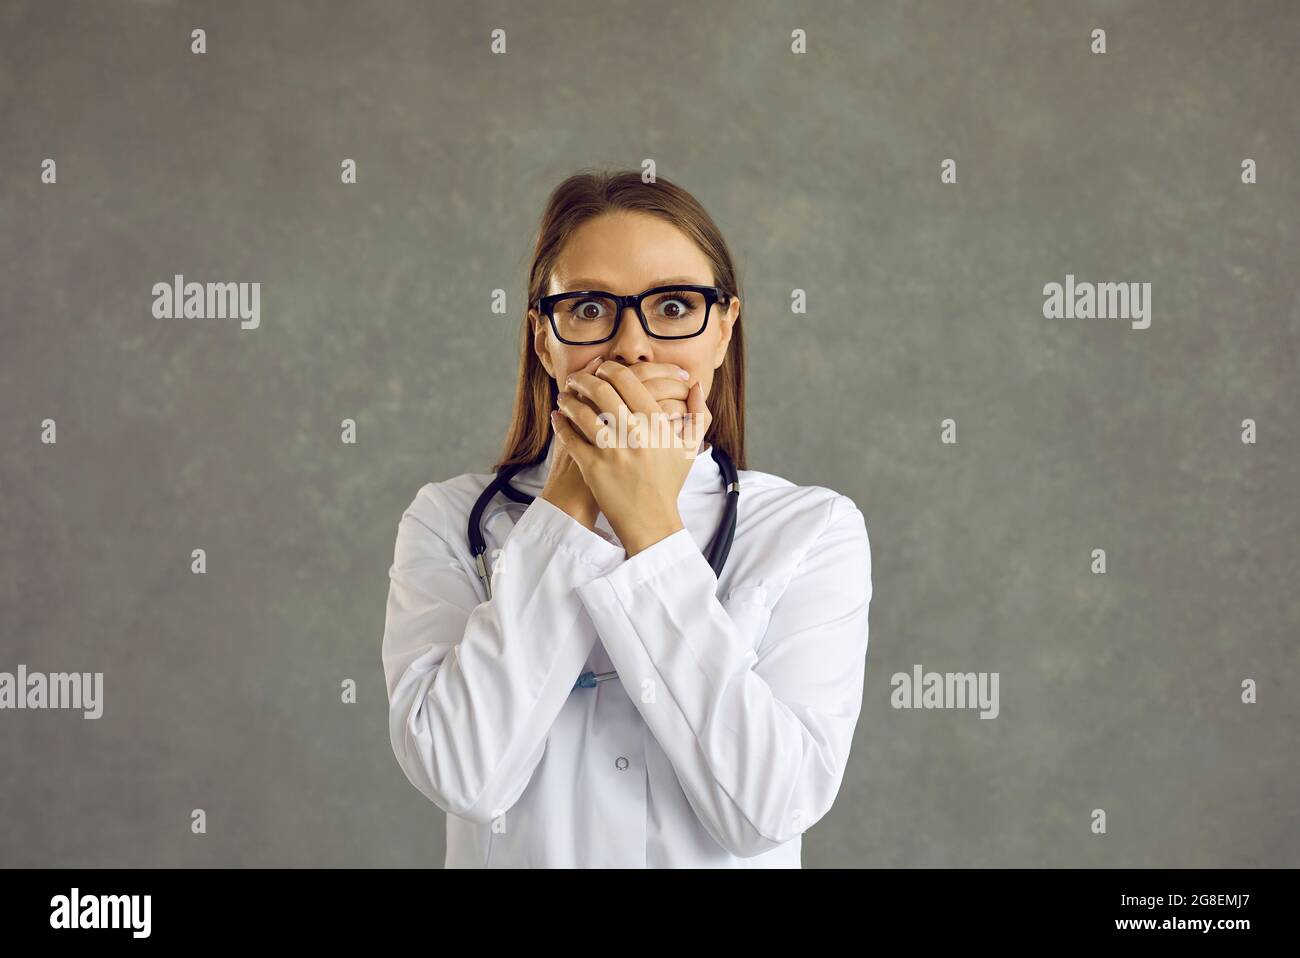 Worried female doctor with a frightened expression covering her mouth on a gray background. Stock Photo